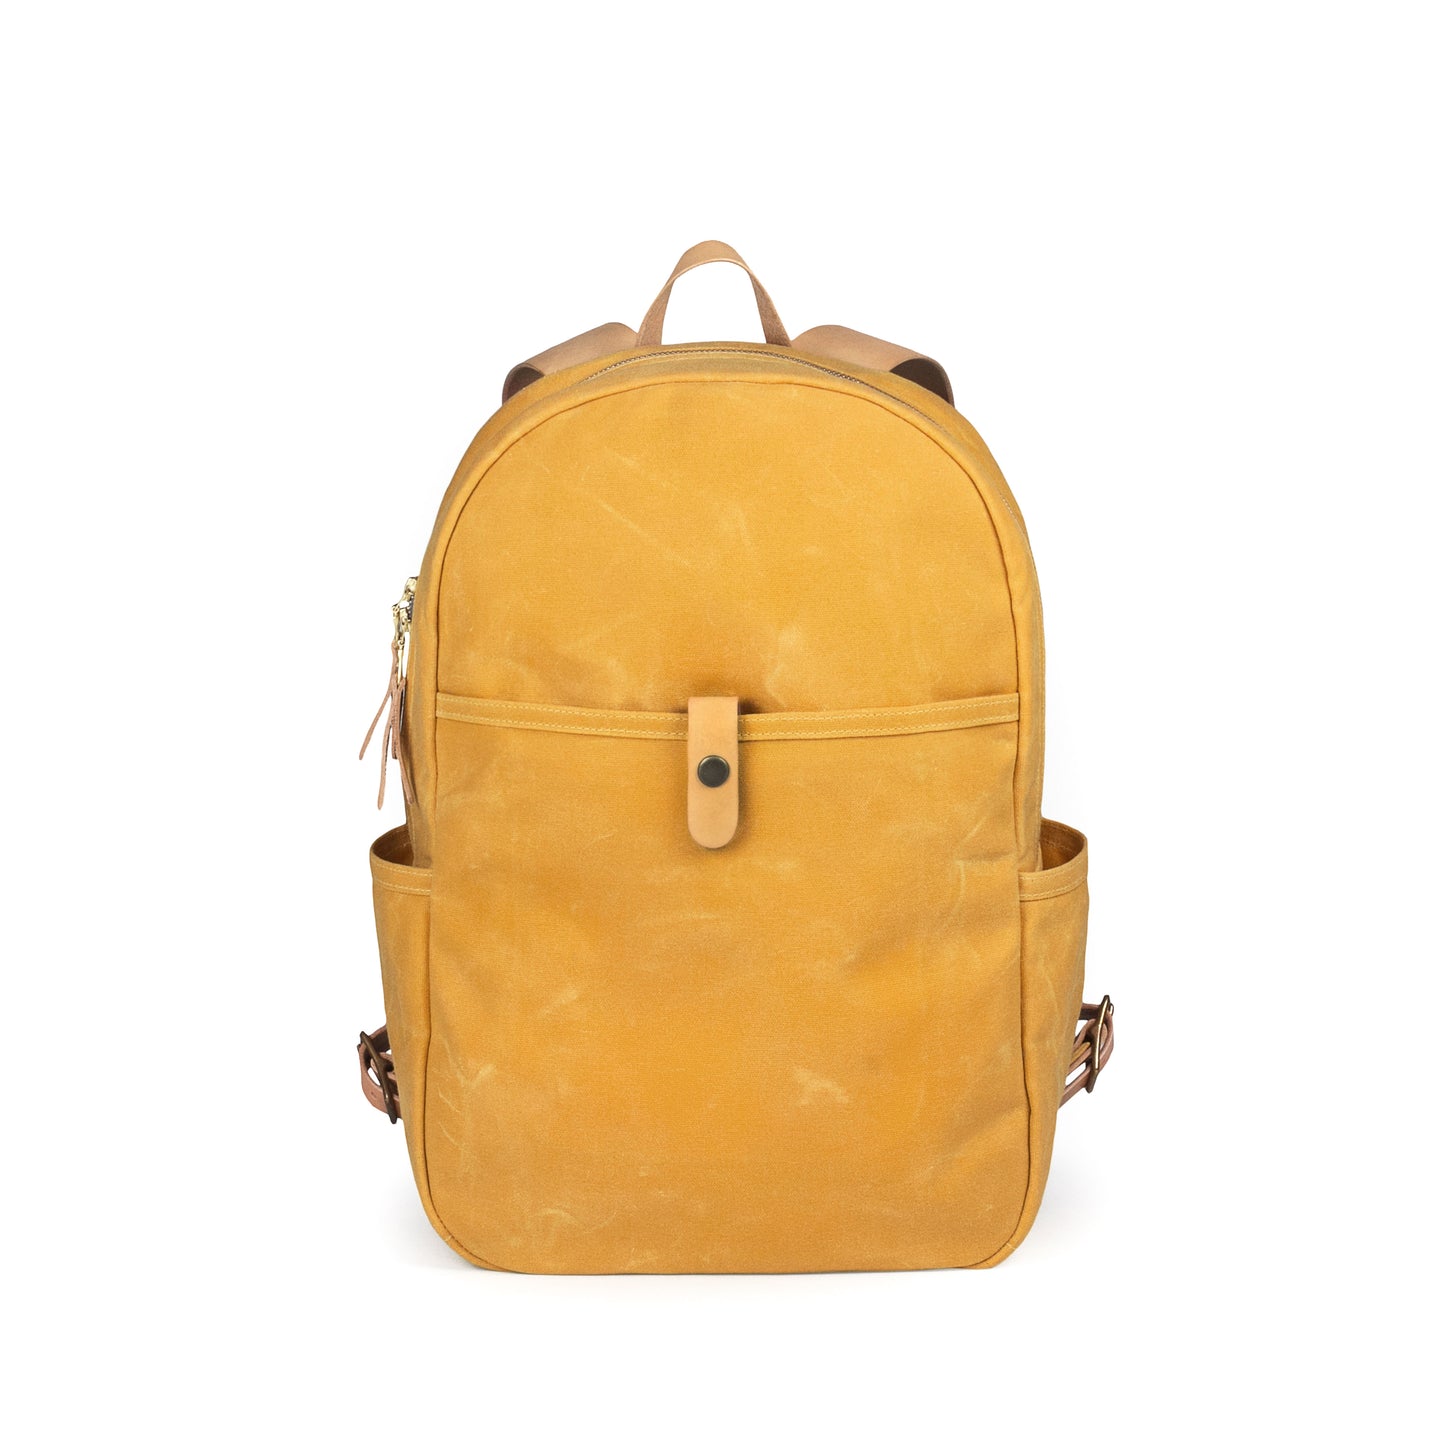 Tonino Backpack Yellow Waxed Canvas & Natural Leather